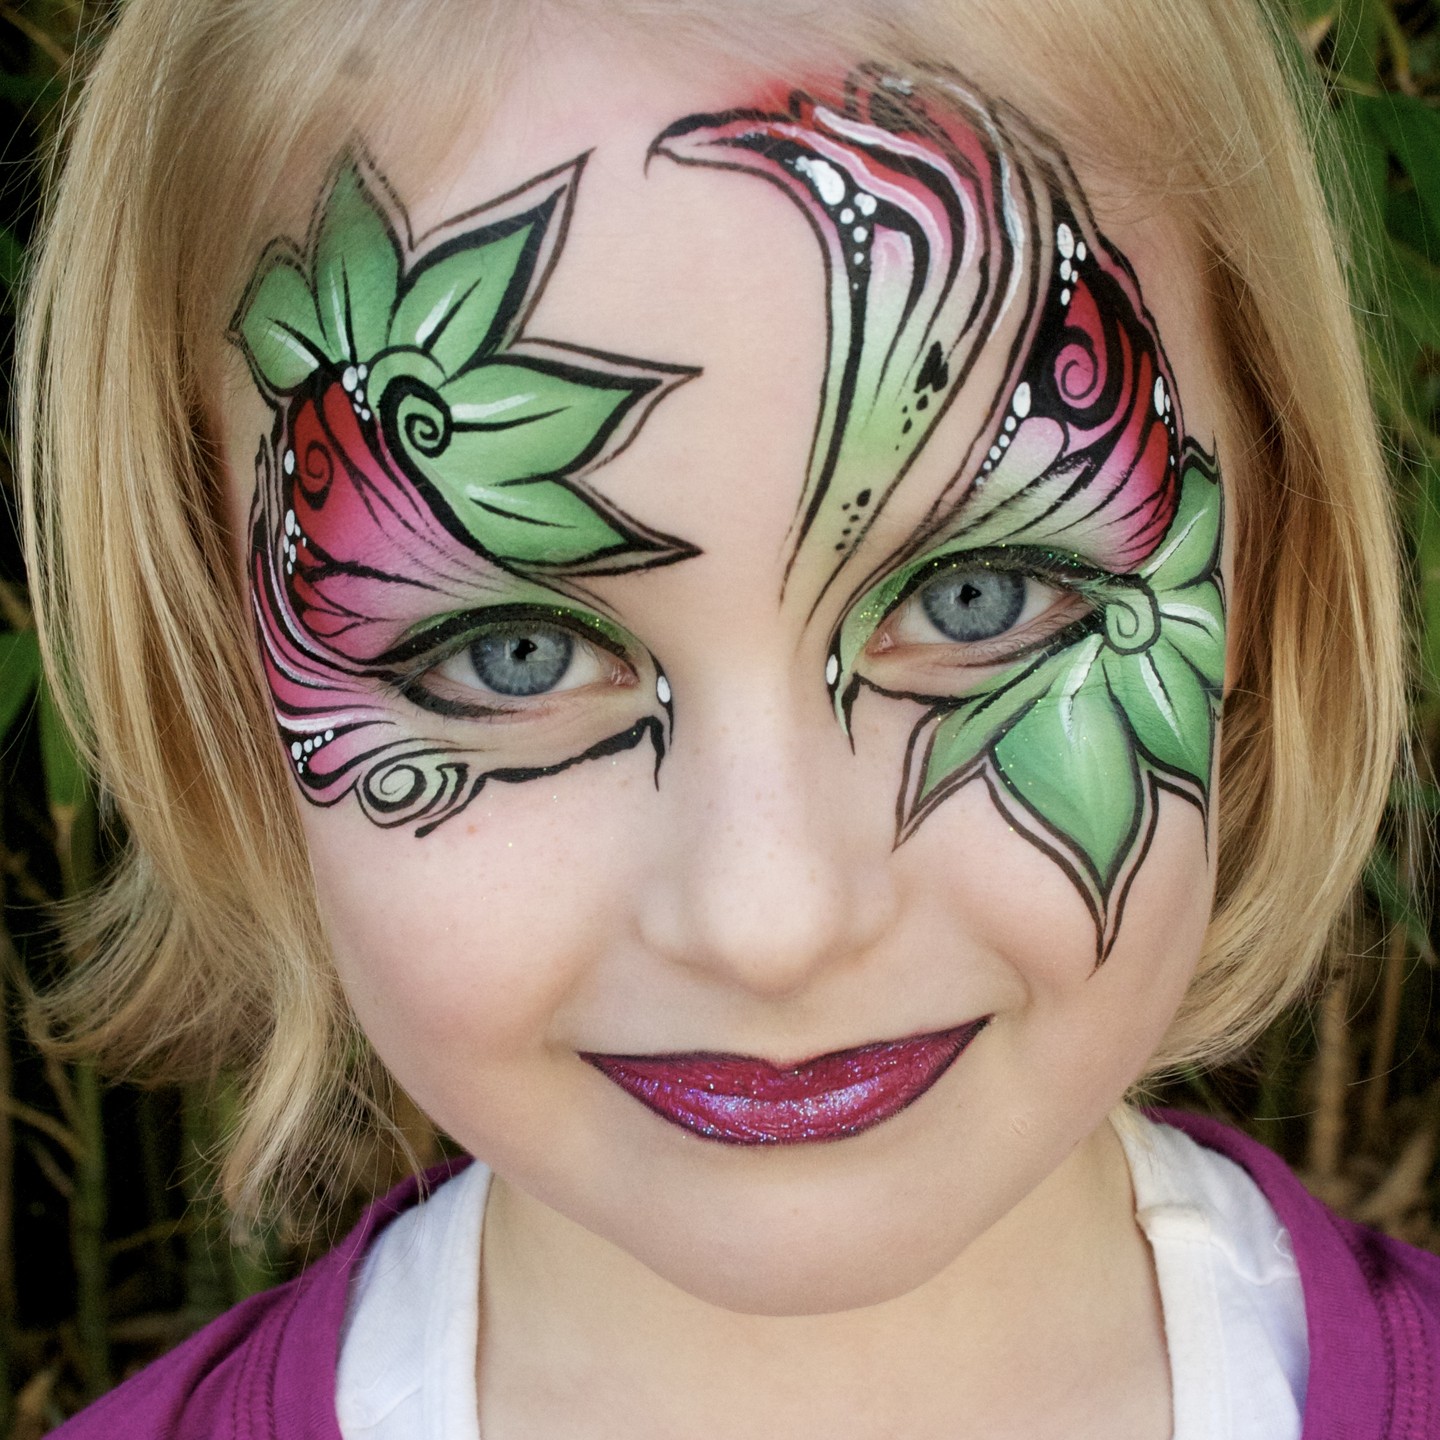 Throwback Thursday! One of my absolute favourites, from 2012 on the lovely Miss J. 

#throwbackthursday #facepainter #facepainting #melbournefacepainter #melbournefacepainting #butterflyfacepainting #looneybinproducts#melbournekidsparties #melbournekidsparties #facepaintersofinstagram #onestrokefacepainting #fpa #melbourneballoontwister #balloontwistingmelbourne
#lovemyjob #mehronprisma #balloontwistermelbourne